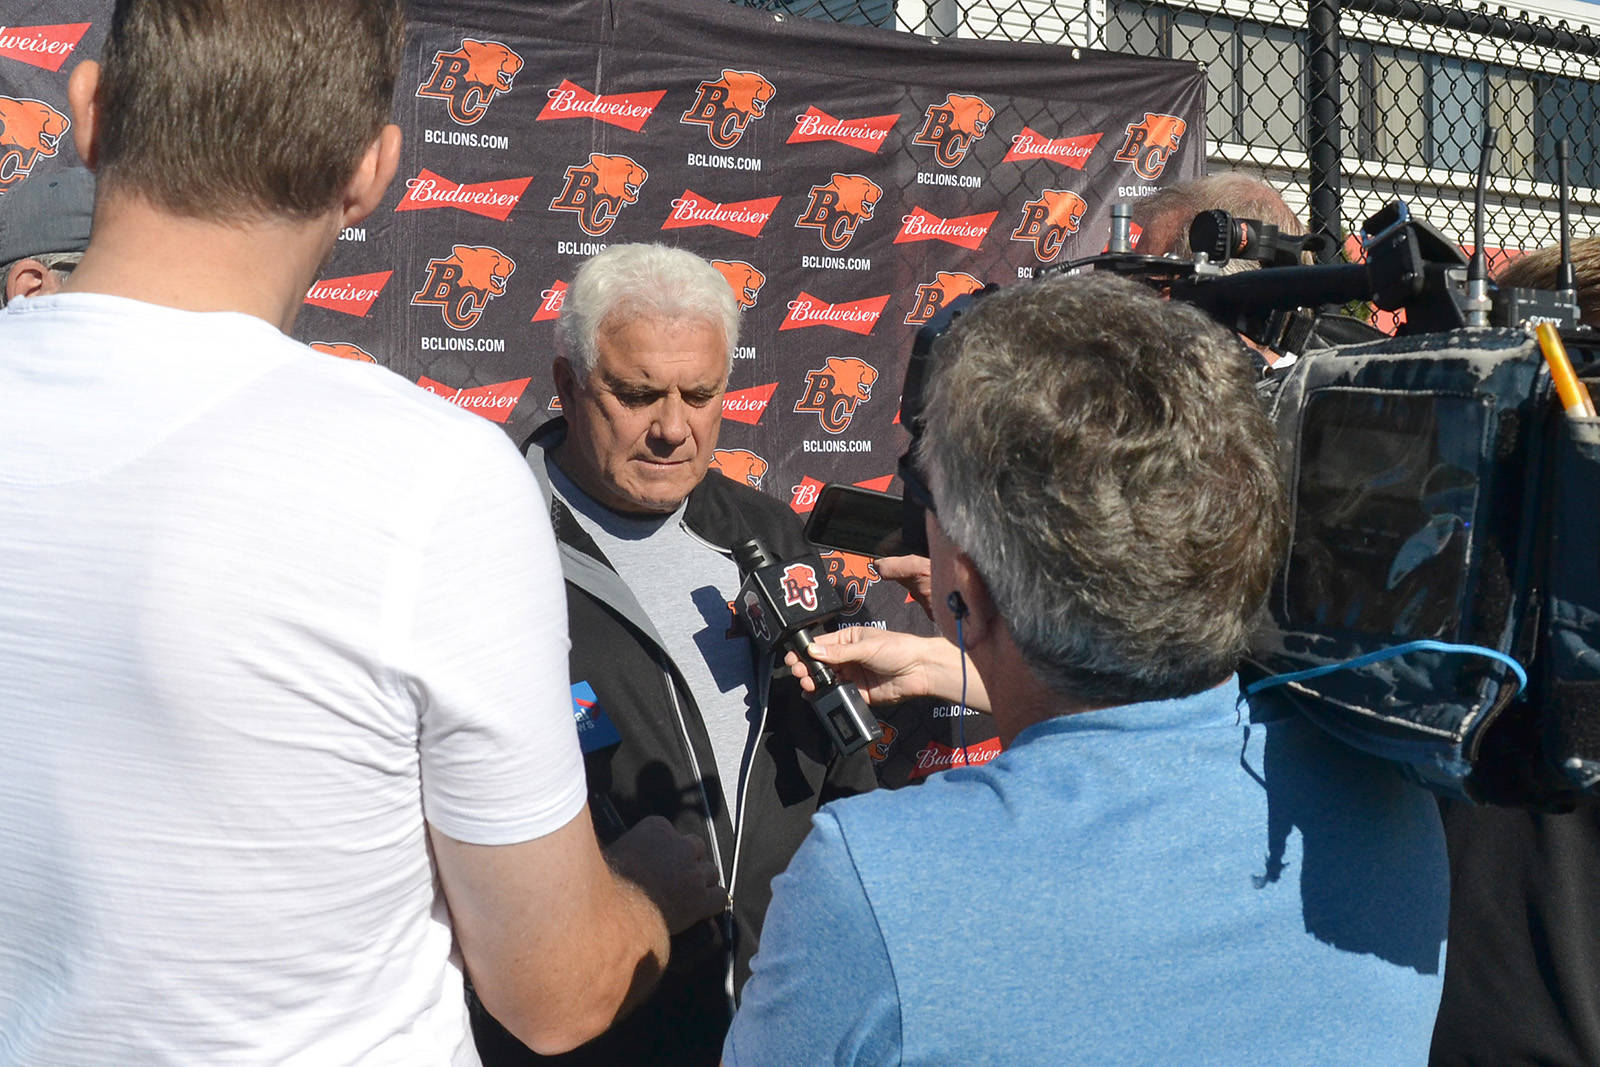 BC Lions coach Wally Buono, a South Surrey resident, speaks with the media after a practice earlier this month at the team’s training facility. (Nick Greenizan photo)